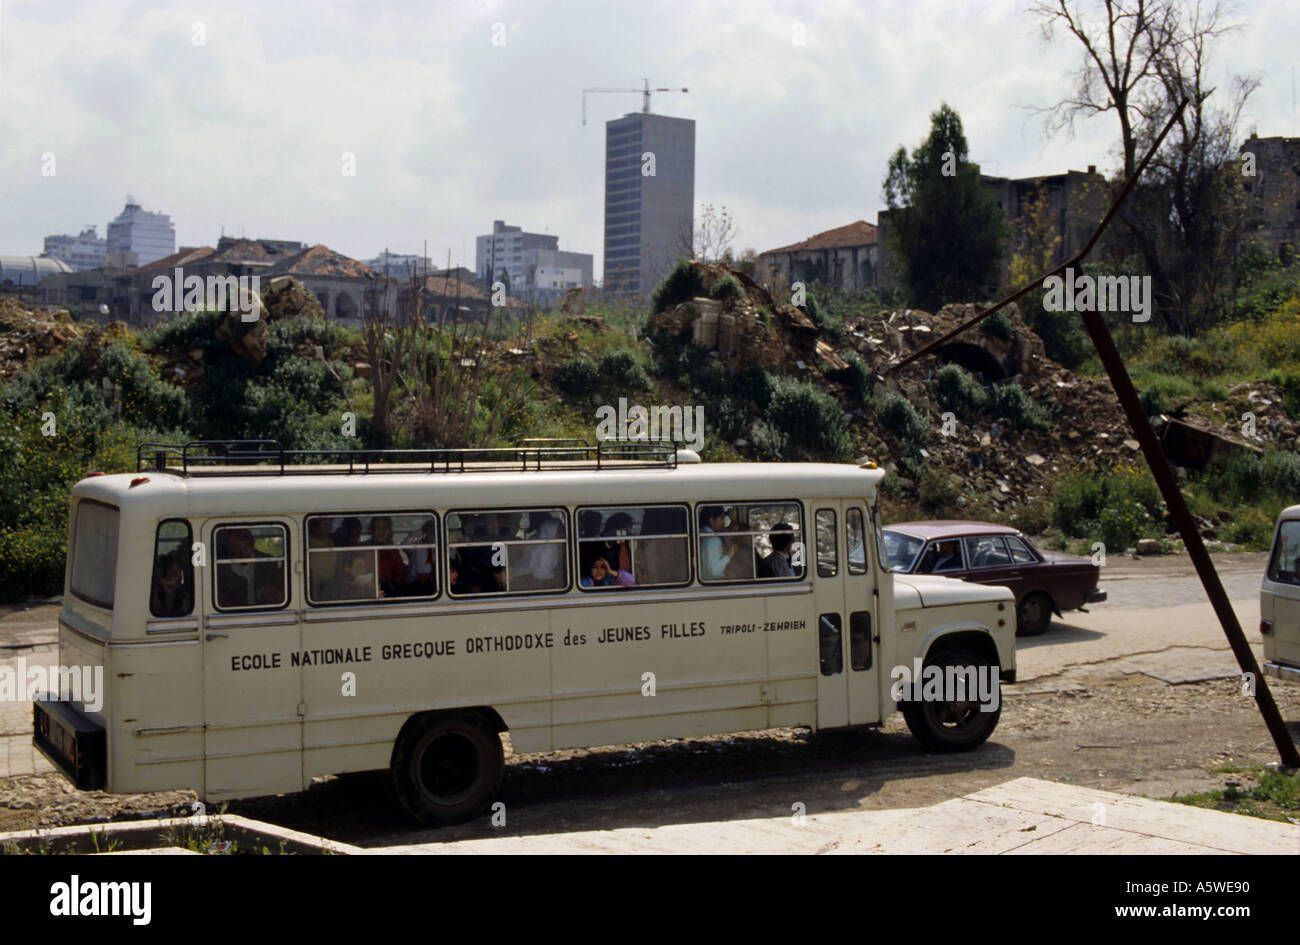 Lebanon Beirut In April 1994 Martyrs Place After The Civil War Bus Of Schoolgirls Of The National Greek Orthodox School Visiting Stock Photo